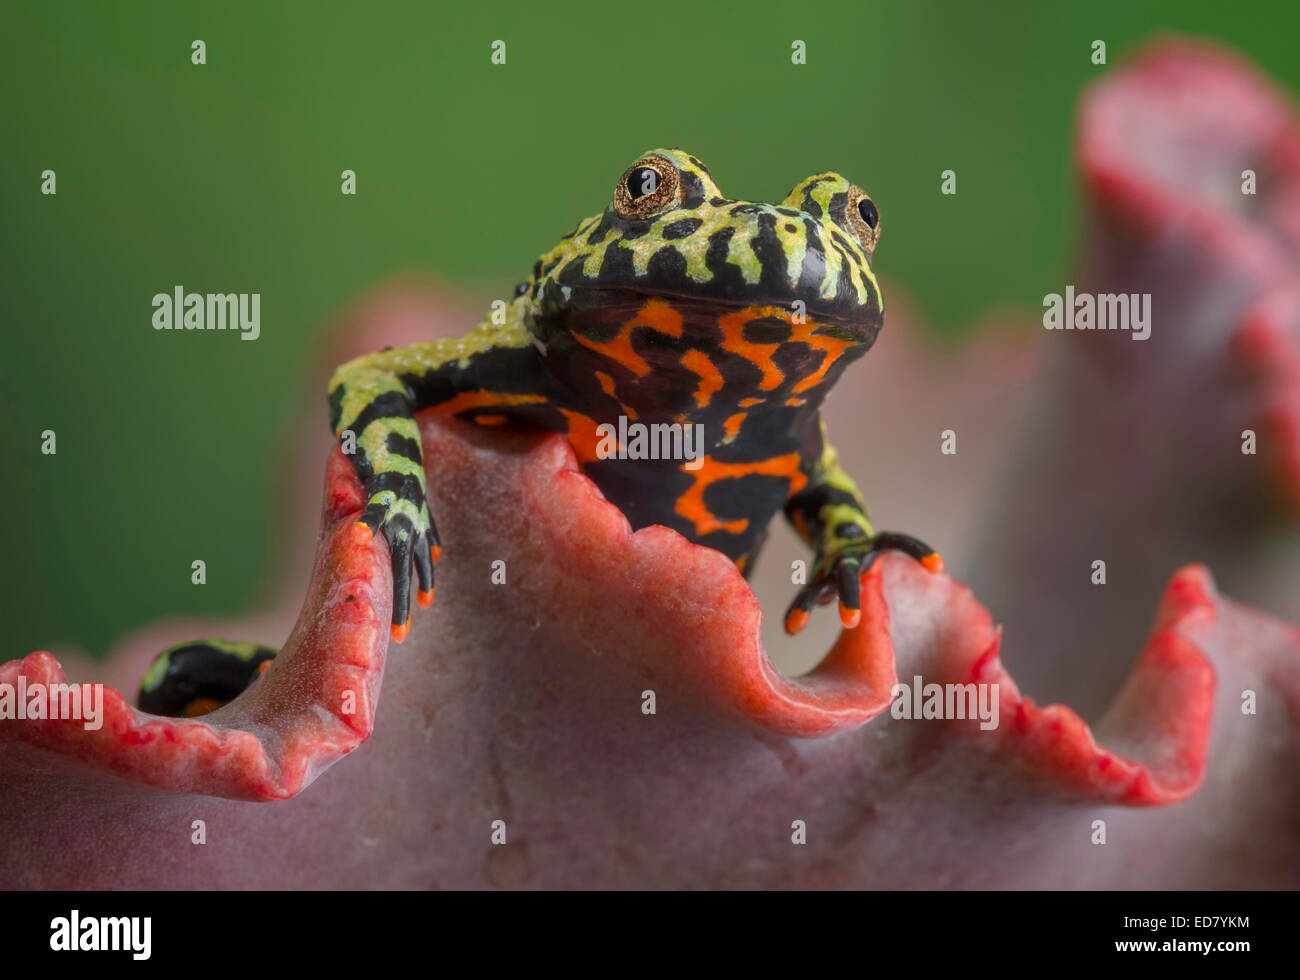 Fire-bellied Toad peering over orange leaf Stock Photo